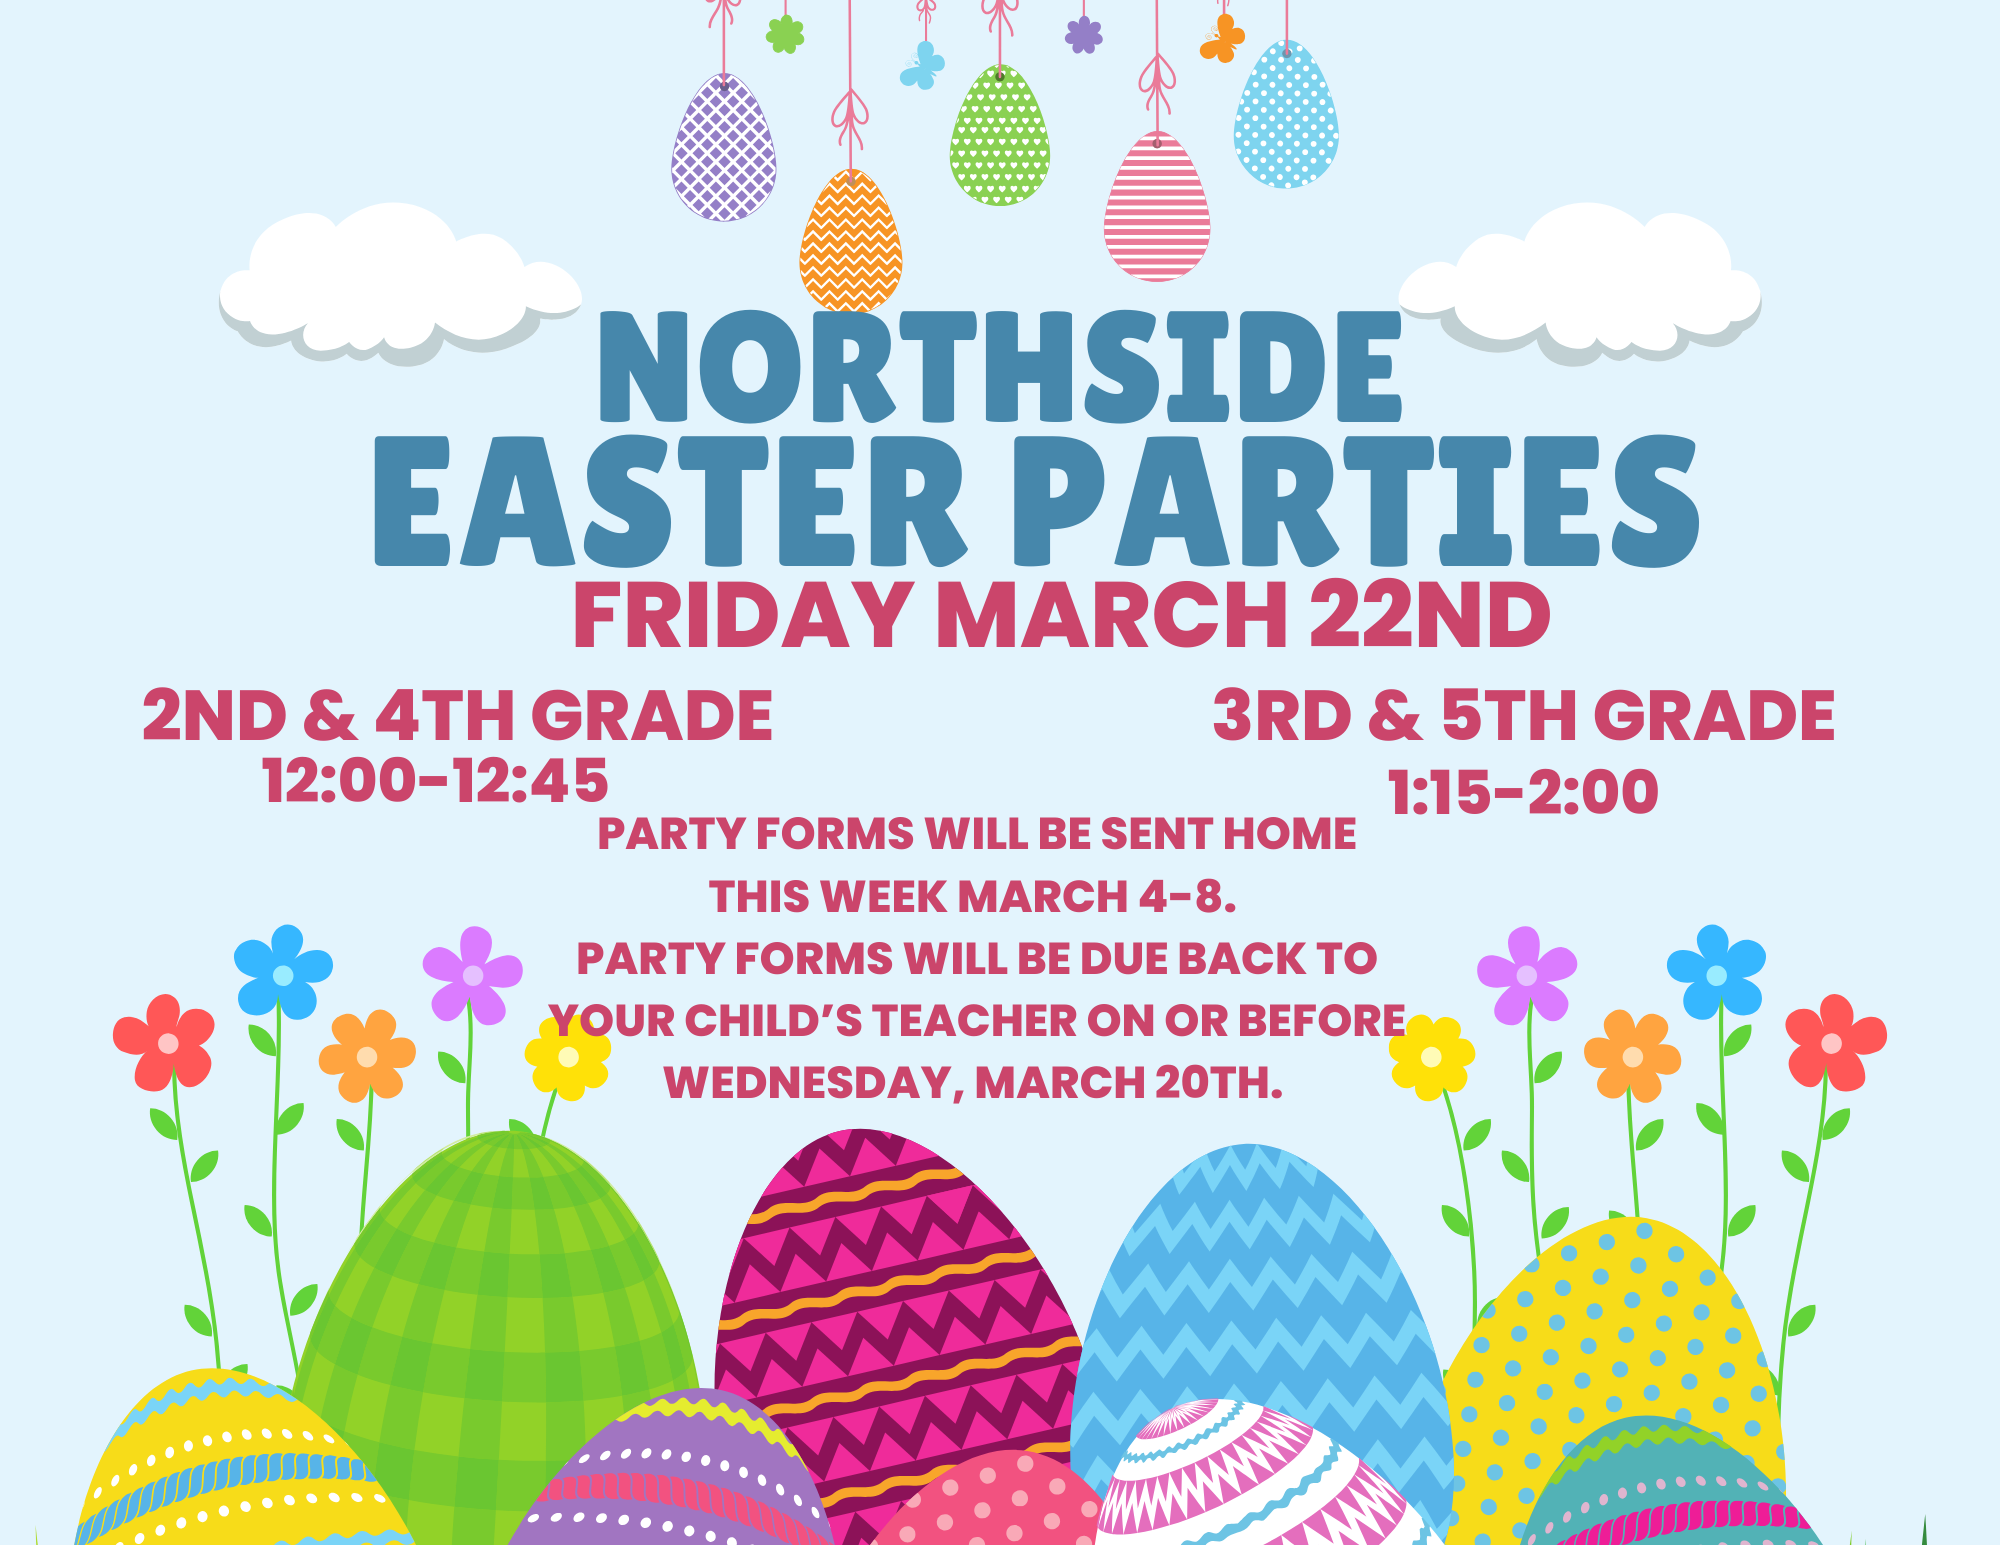 Easter Parties FRIDAY MARCH 22ND 